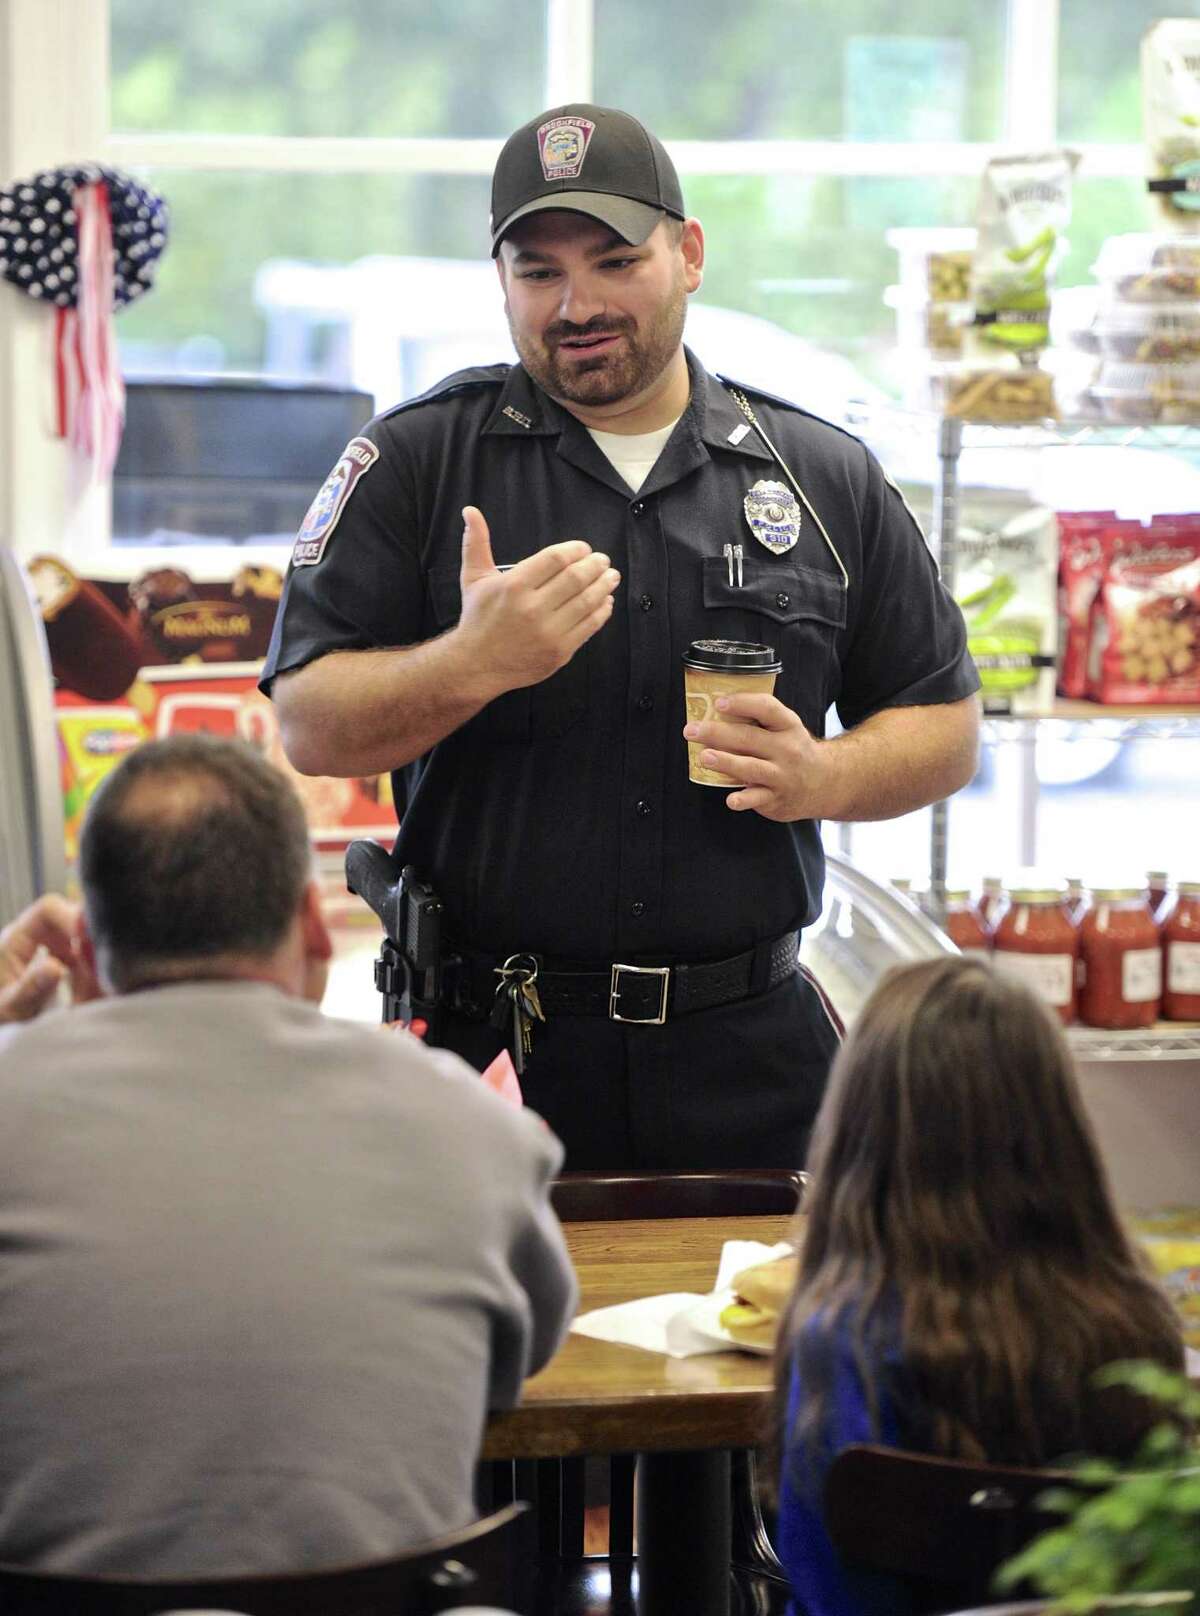 Officer Joe Kyek talks with customers of Brookfield Deli and Catering. Members of the Brookfield Police Department were at the deli for breakfast, and to have a chance to meet and talk with residents. Saturday, October 8, 2016, in Brookfield, Conn.